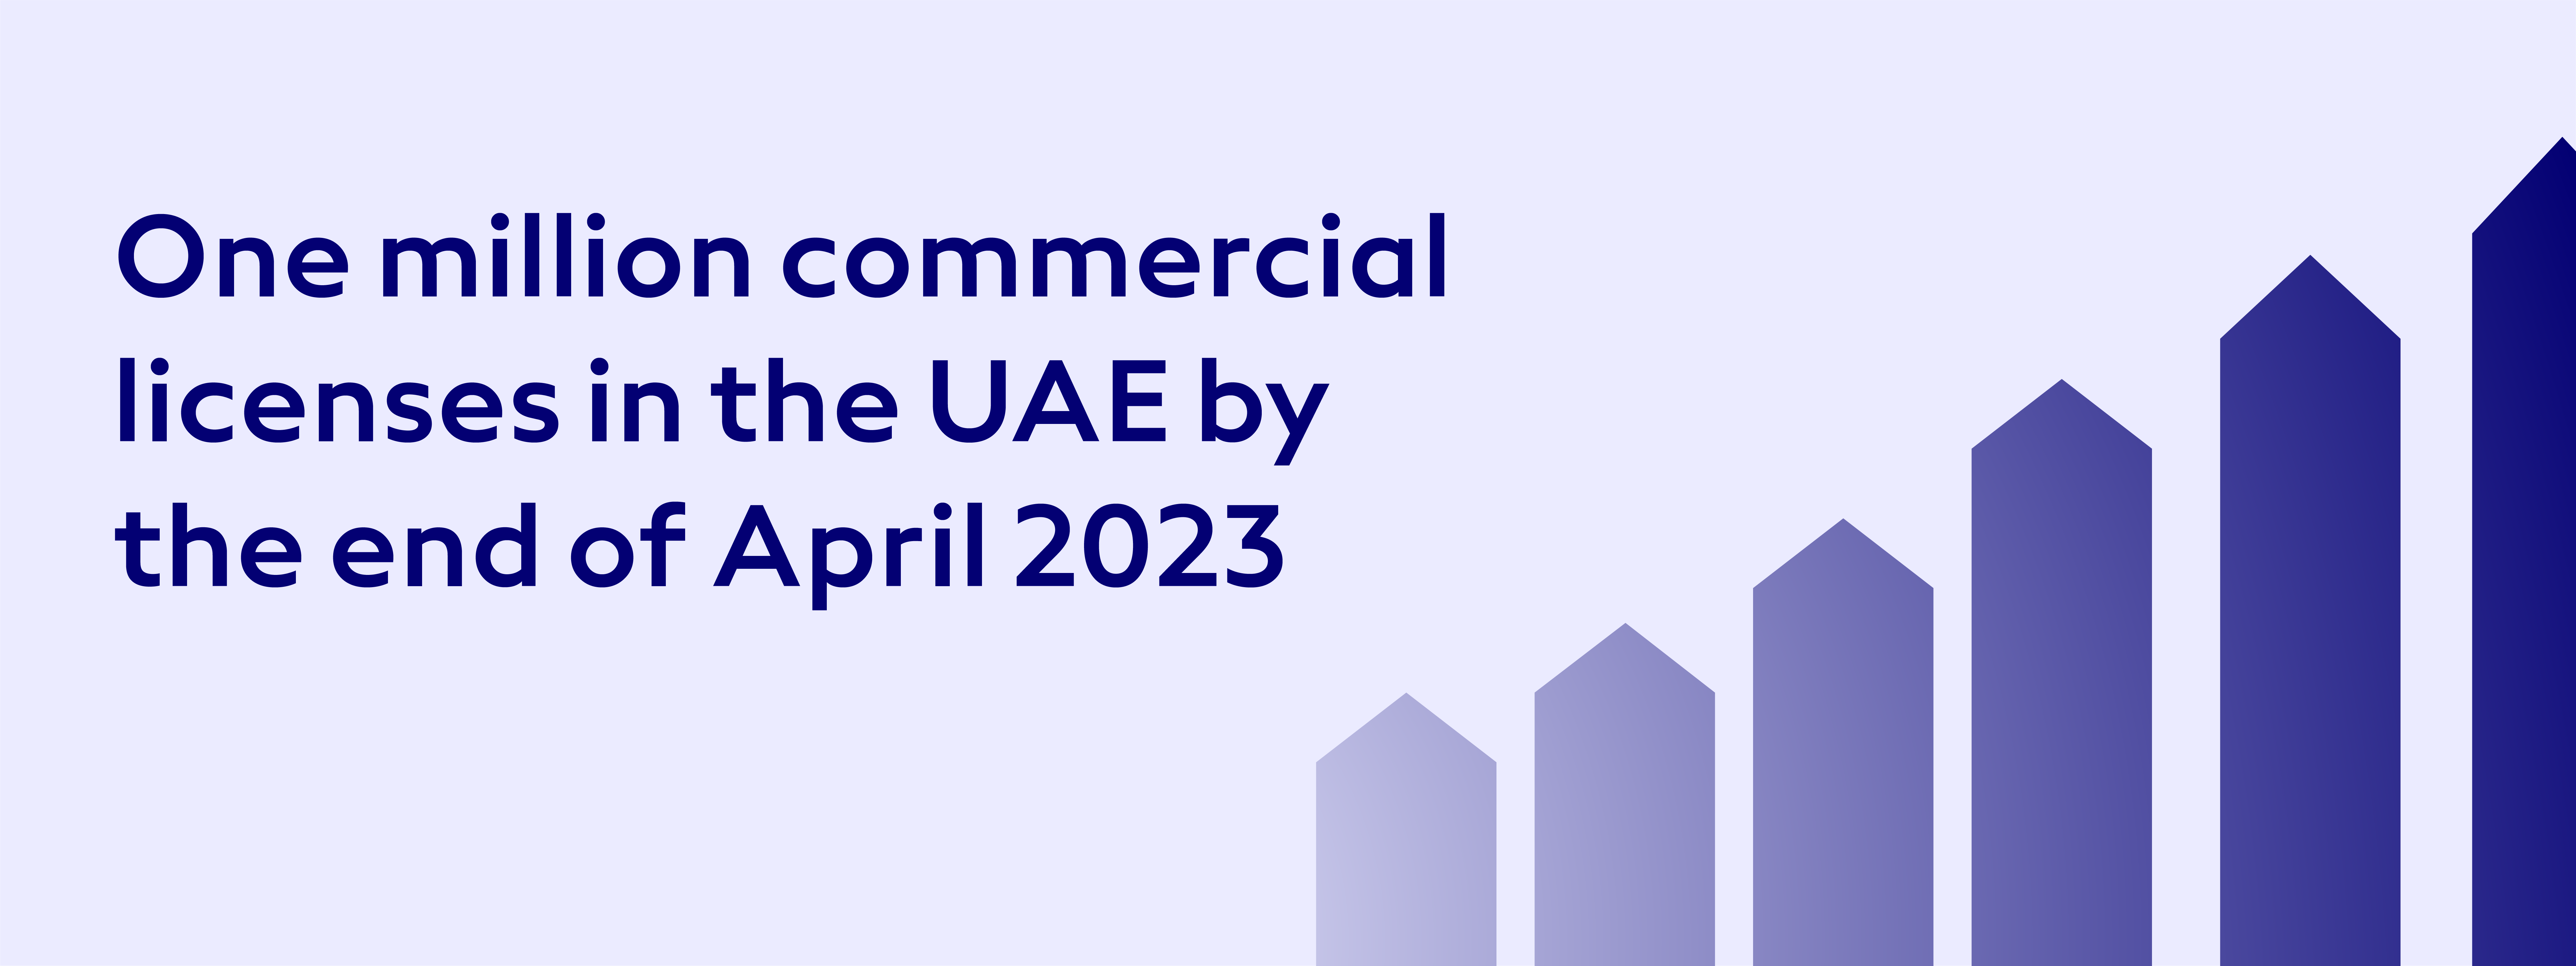 One million commercial licenses in the UAE by the end of April 2023